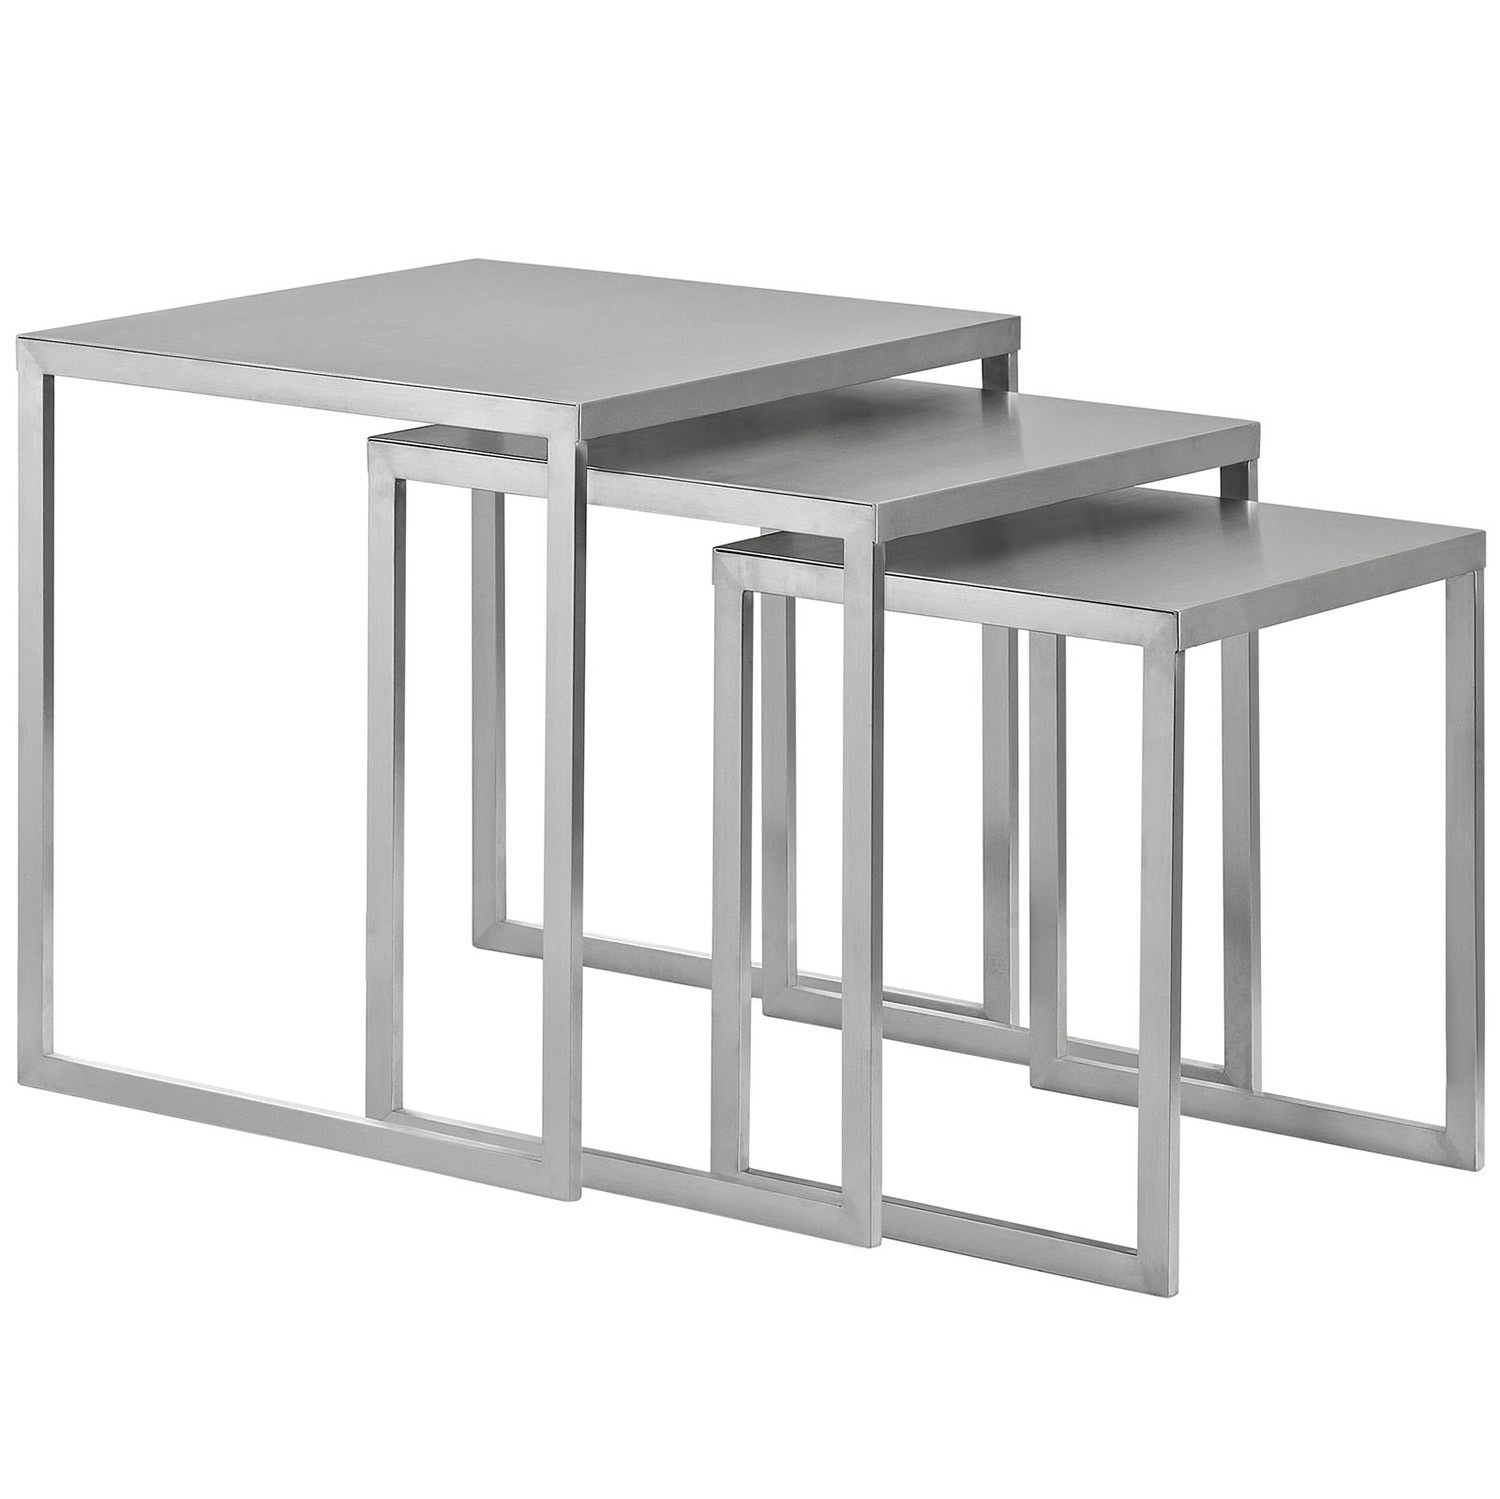 Modway Rail Stainless Steel Nesting Table - Silver